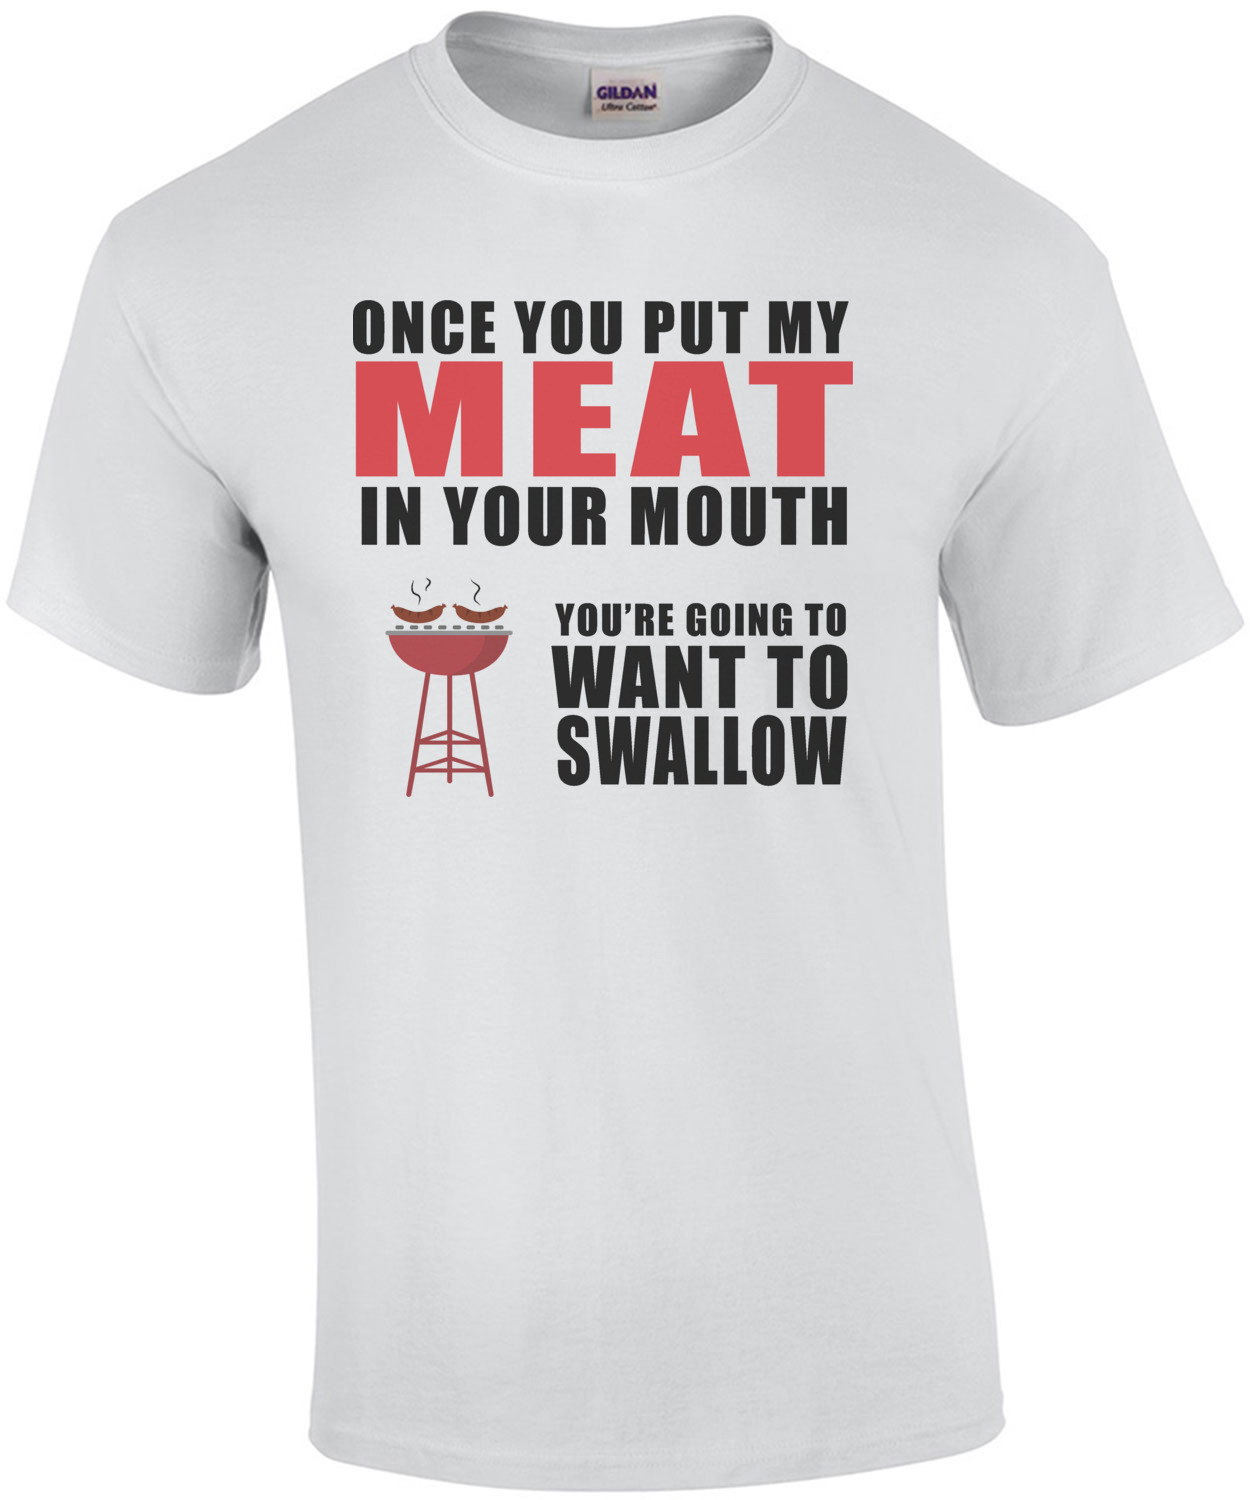 Once you put my meat in your mouth you're going to want to swallow. Funny BBQ